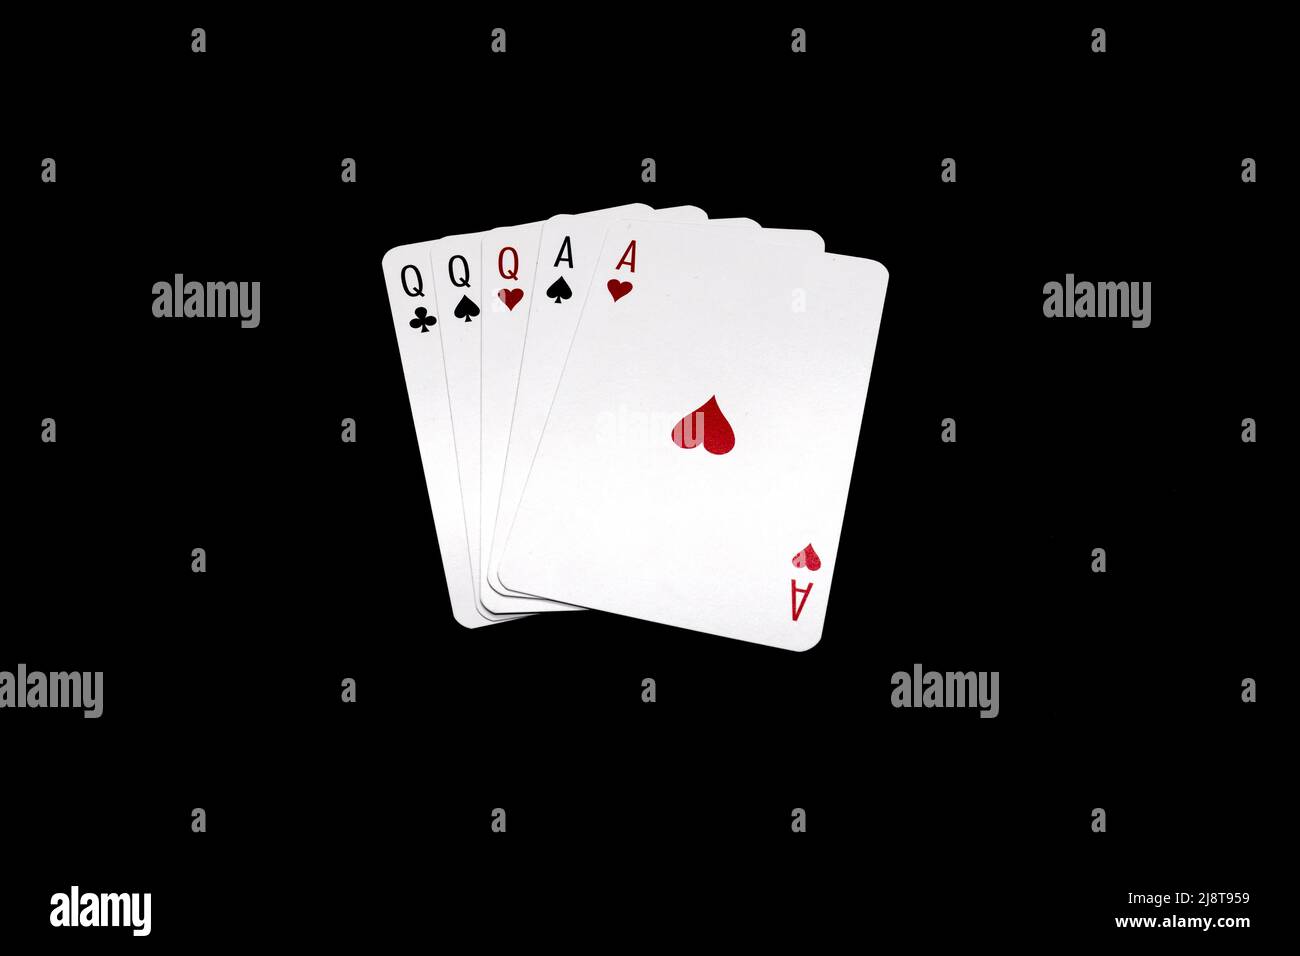 Full House of queens and aces.  Poker hand isolated on black background Stock Photo